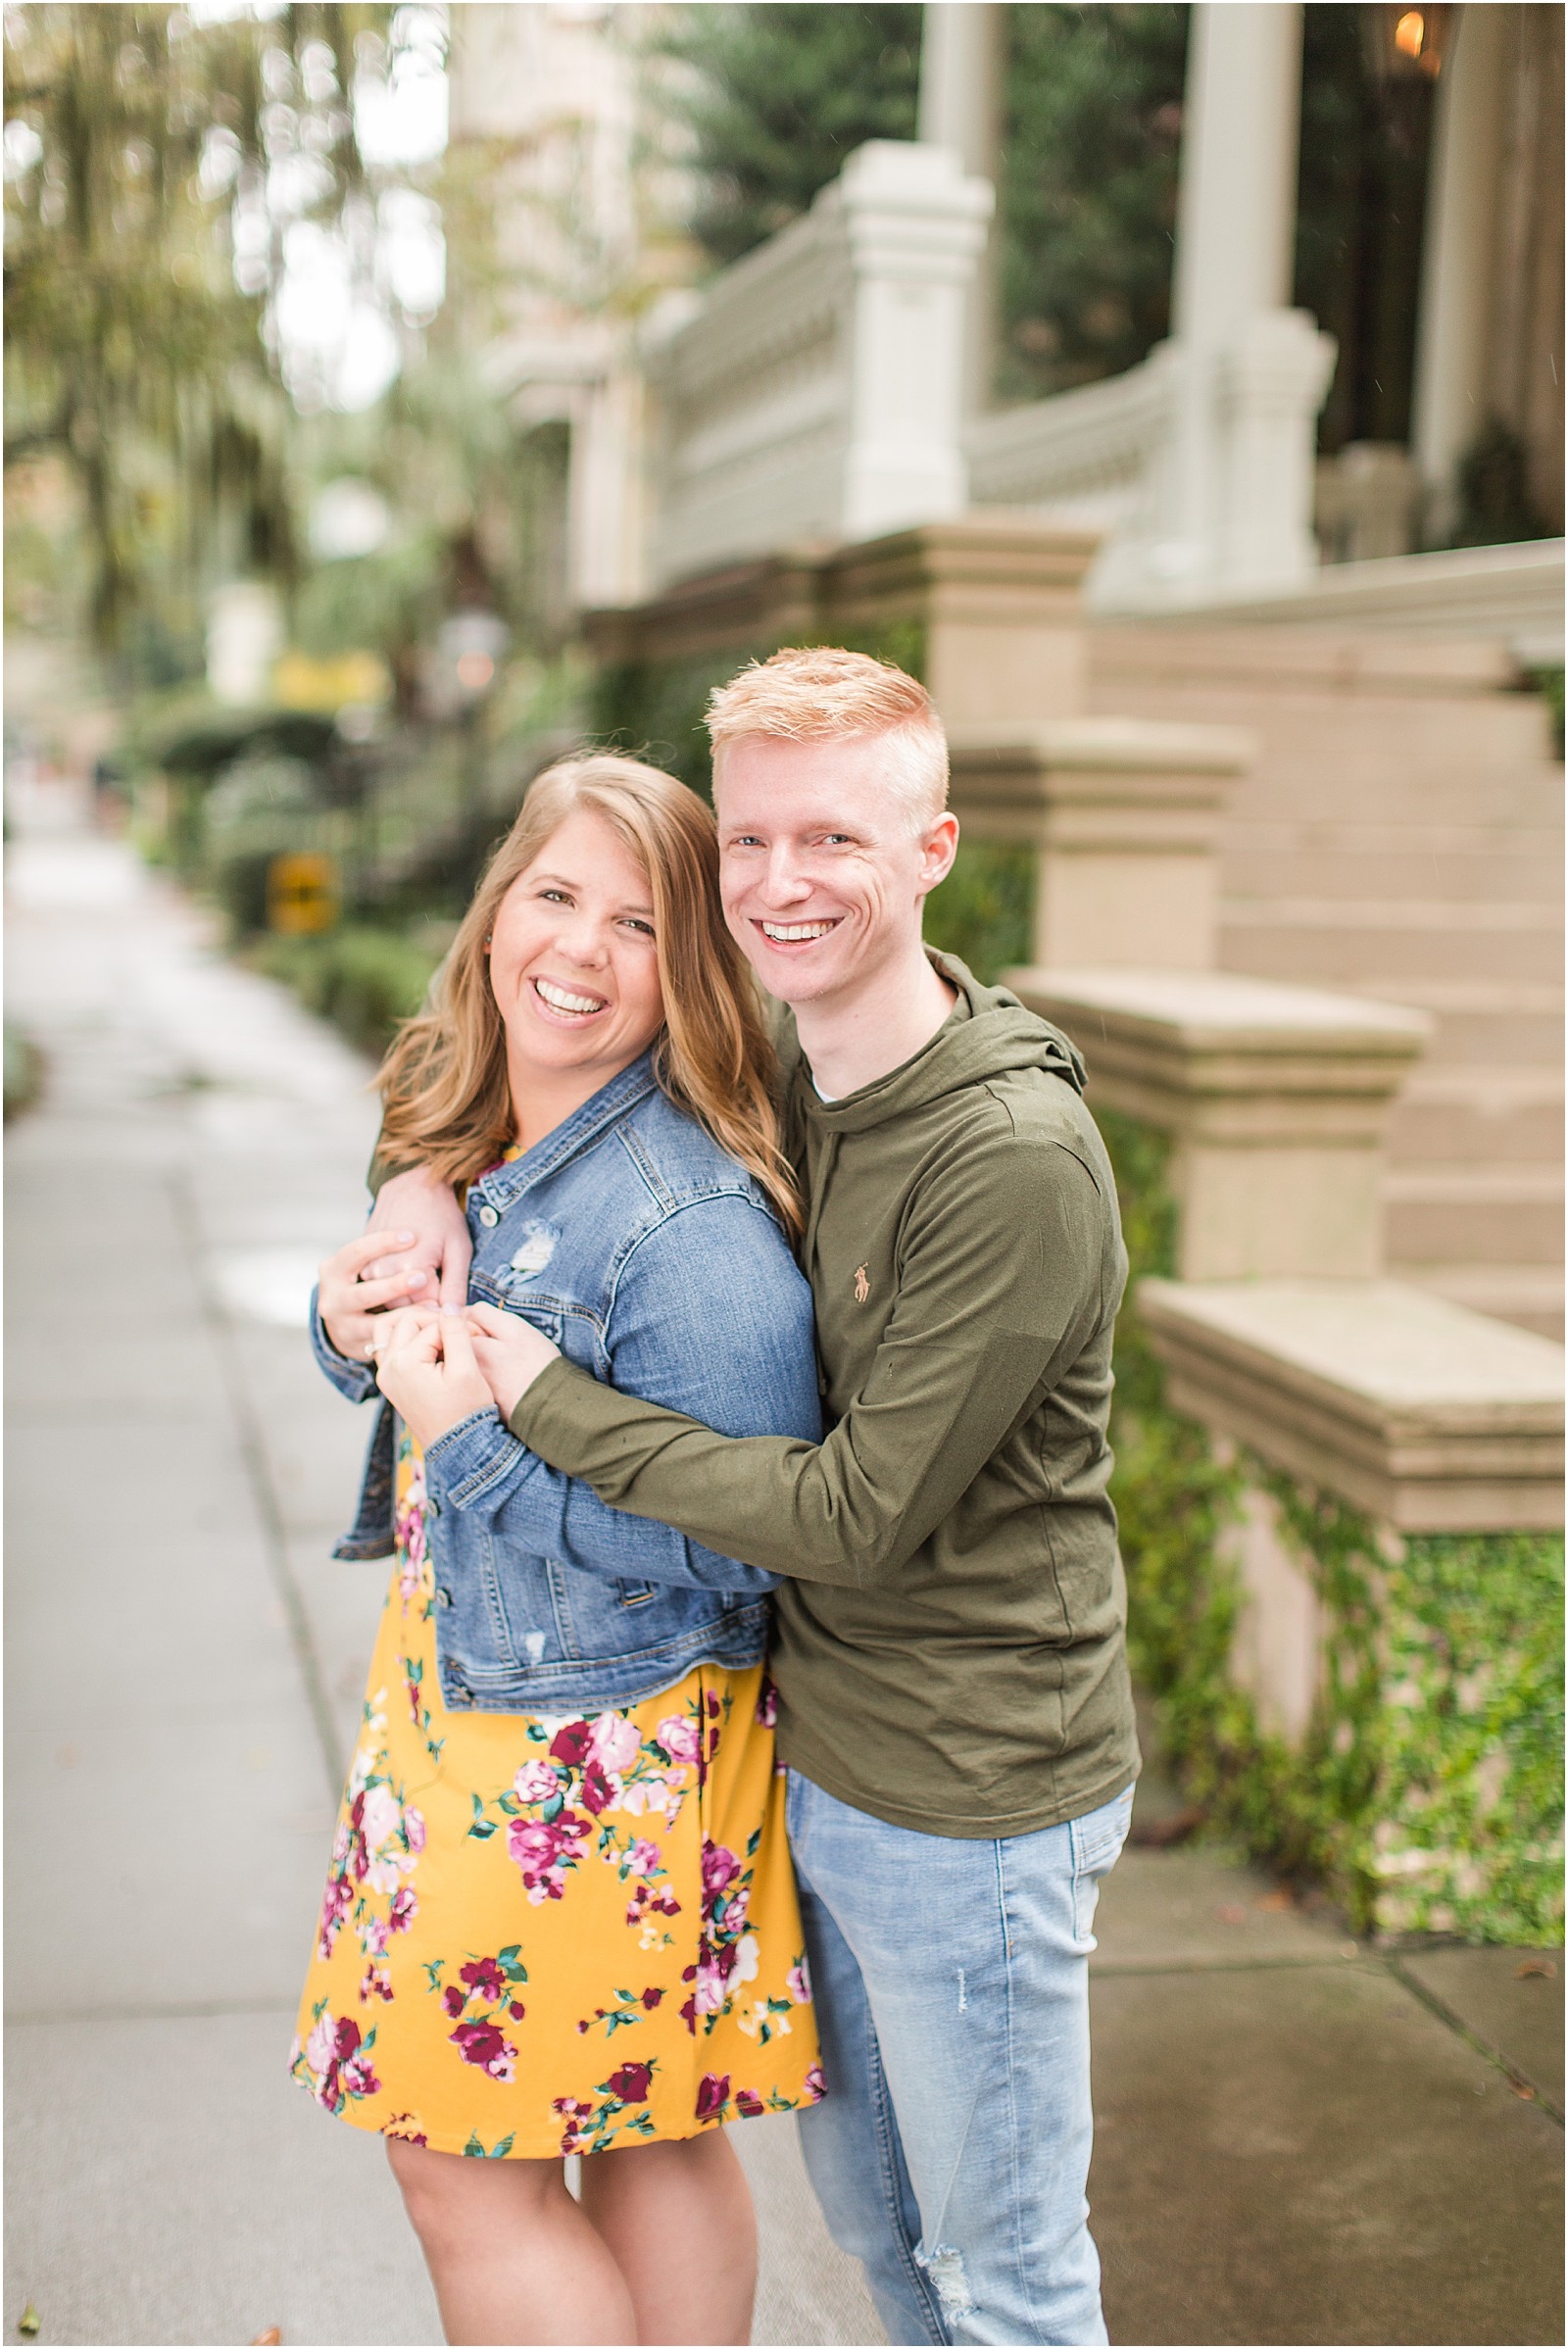 A Destination Engagement Session in Savannah, Georgia | Bret and ...